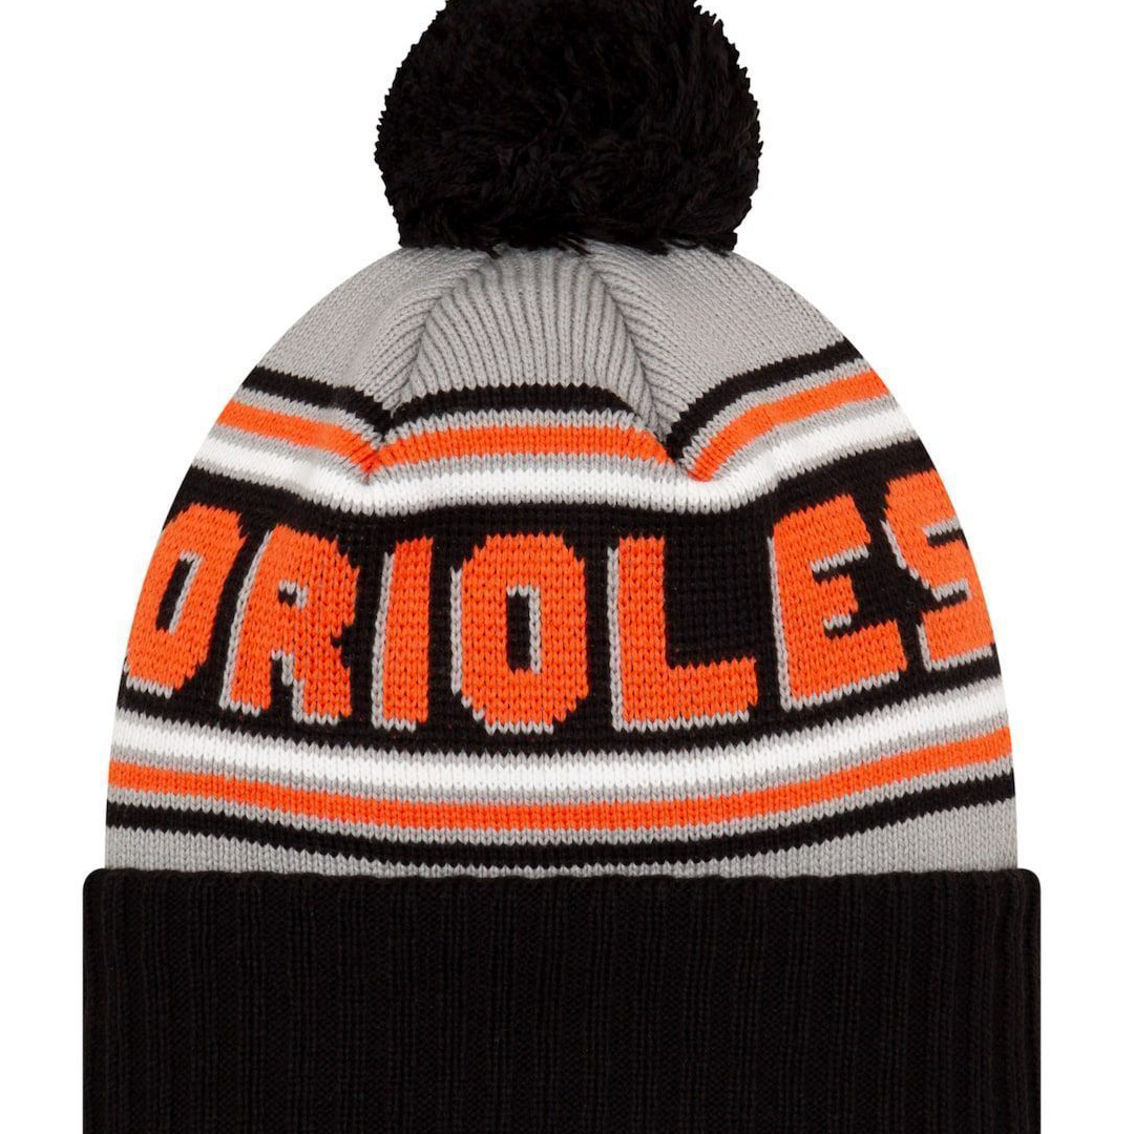 New Era Men's Black Baltimore Orioles Cheer Cuffed Knit Hat with Pom - Image 3 of 3